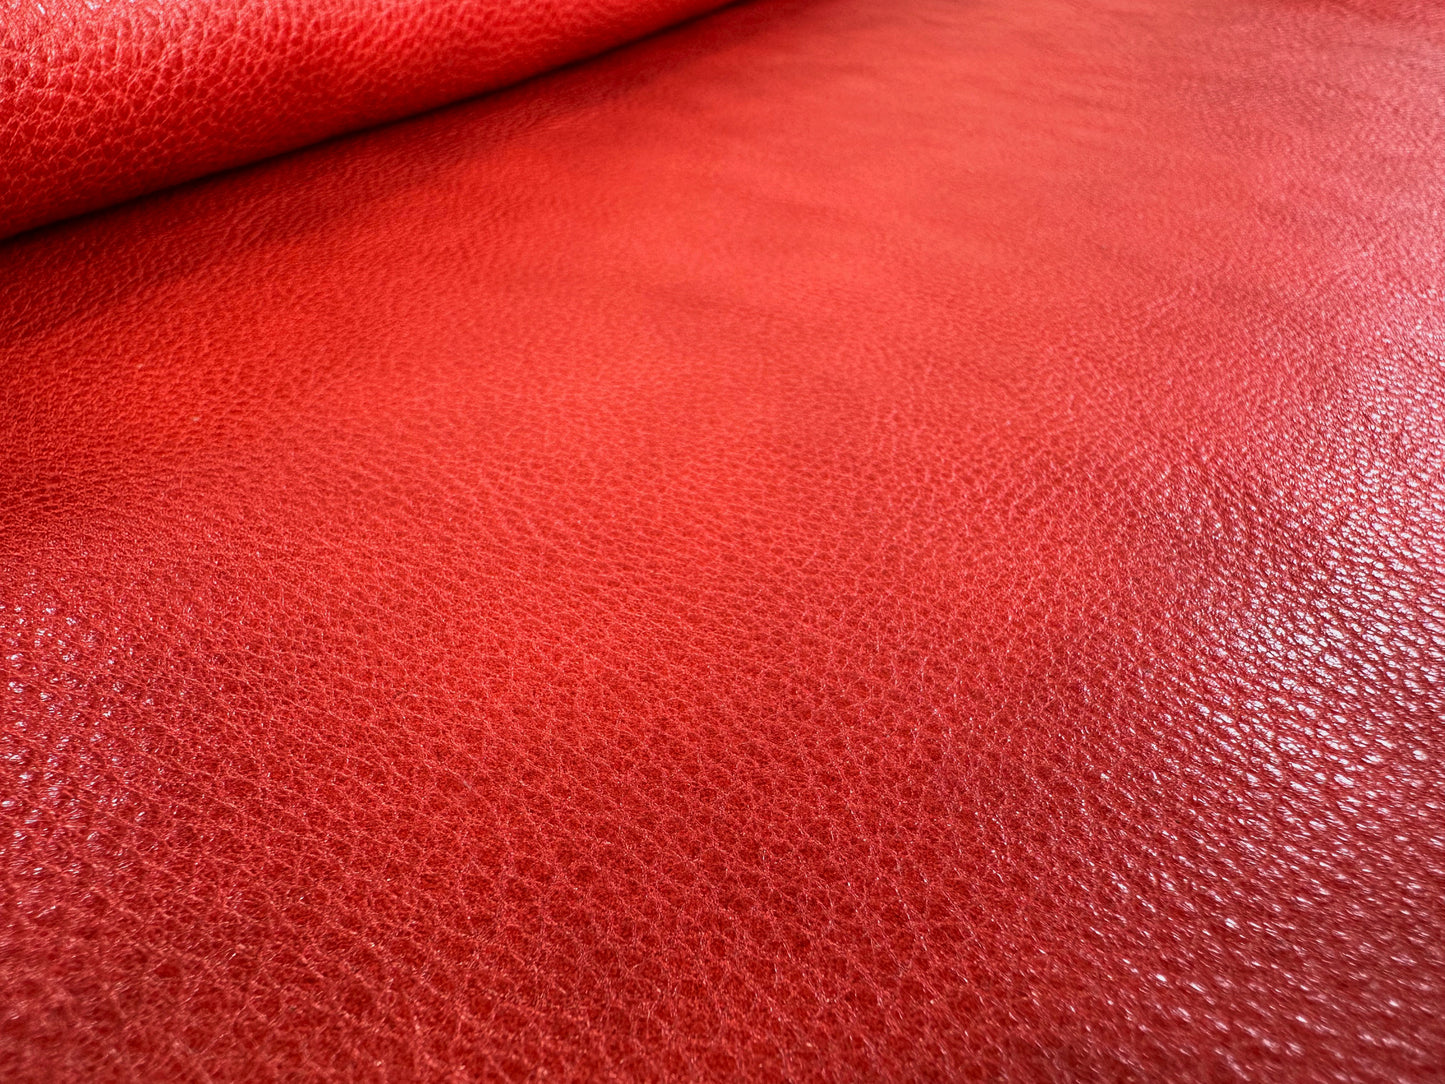 MW Natural Tanned Shrink Leather #5 Red